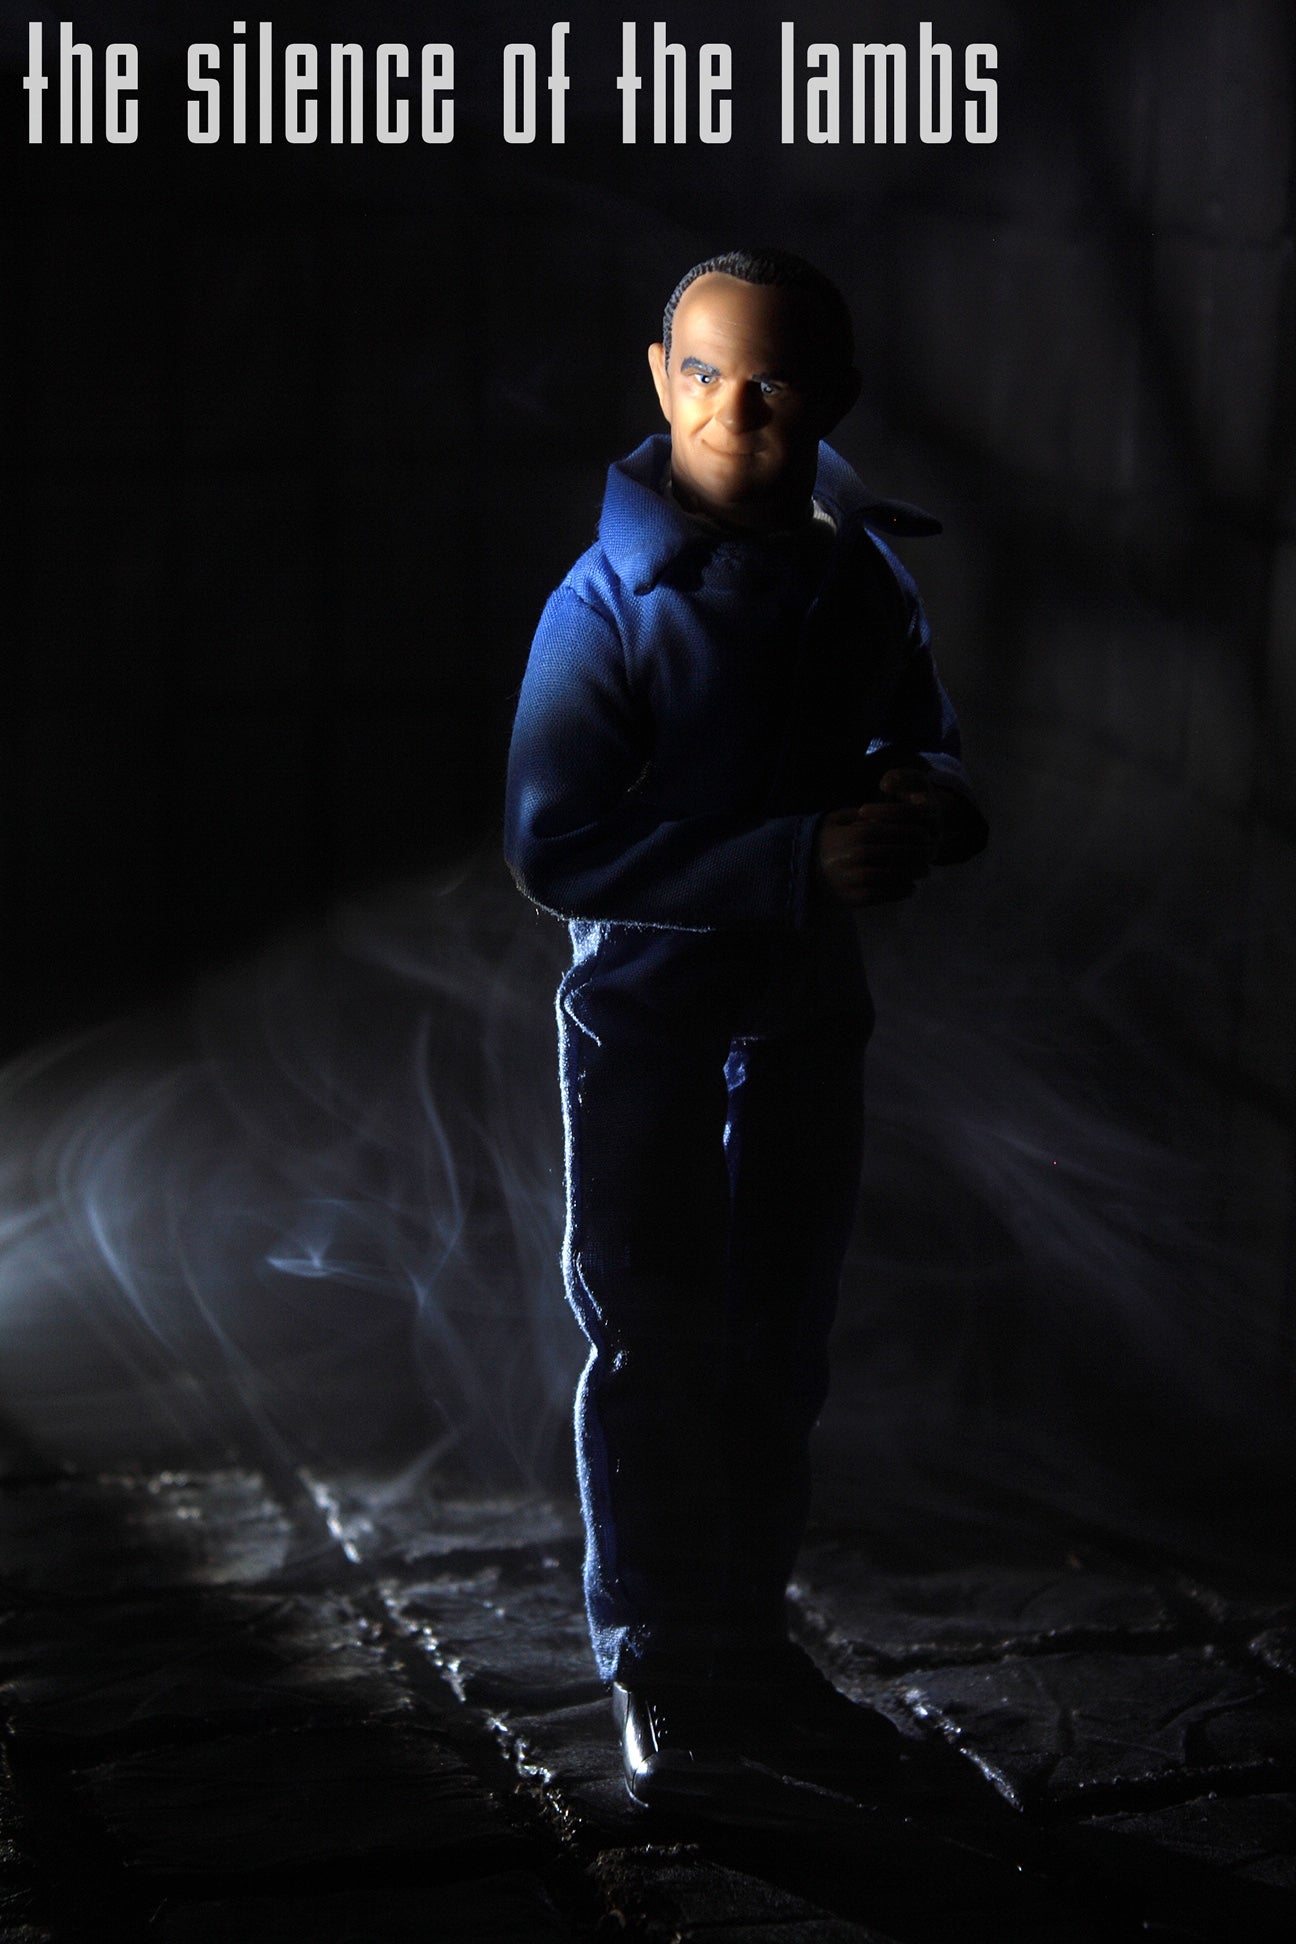 Mego Horror Wave 8 - Silence Of The Lambs - Hannibal Lecter 8" Action Figure - Zlc Collectibles